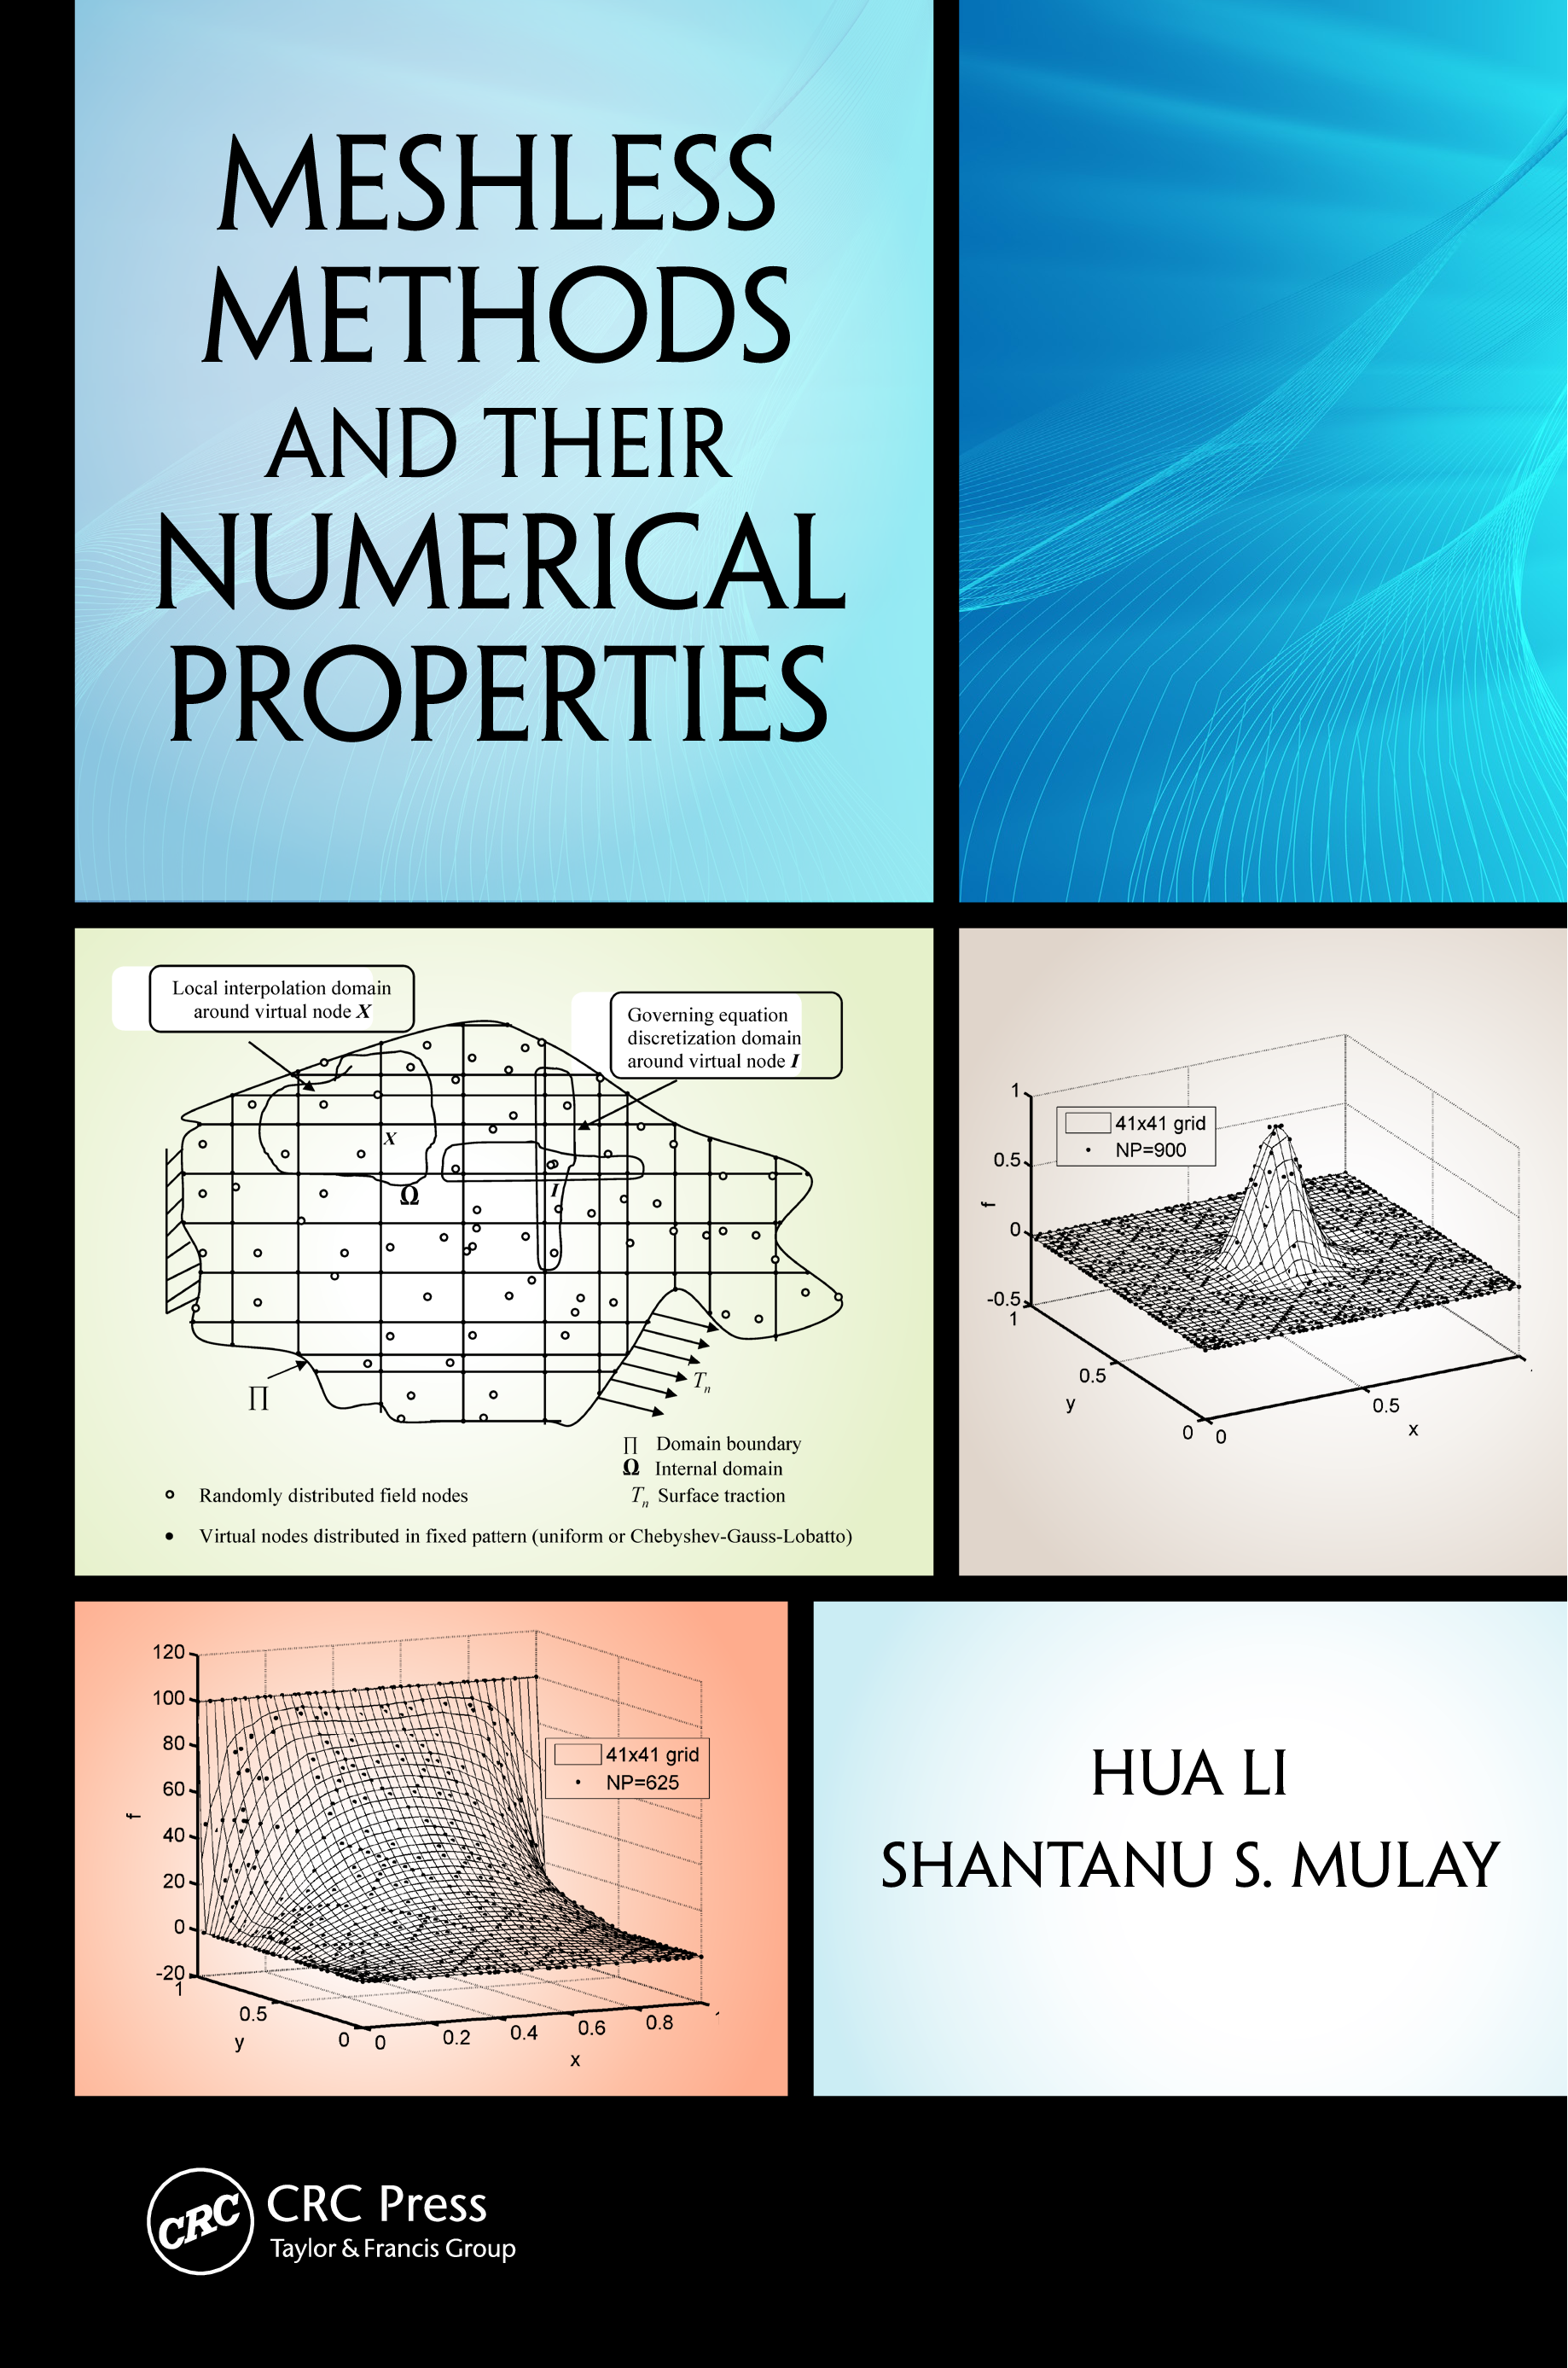 Meshless methods and their numerical properties